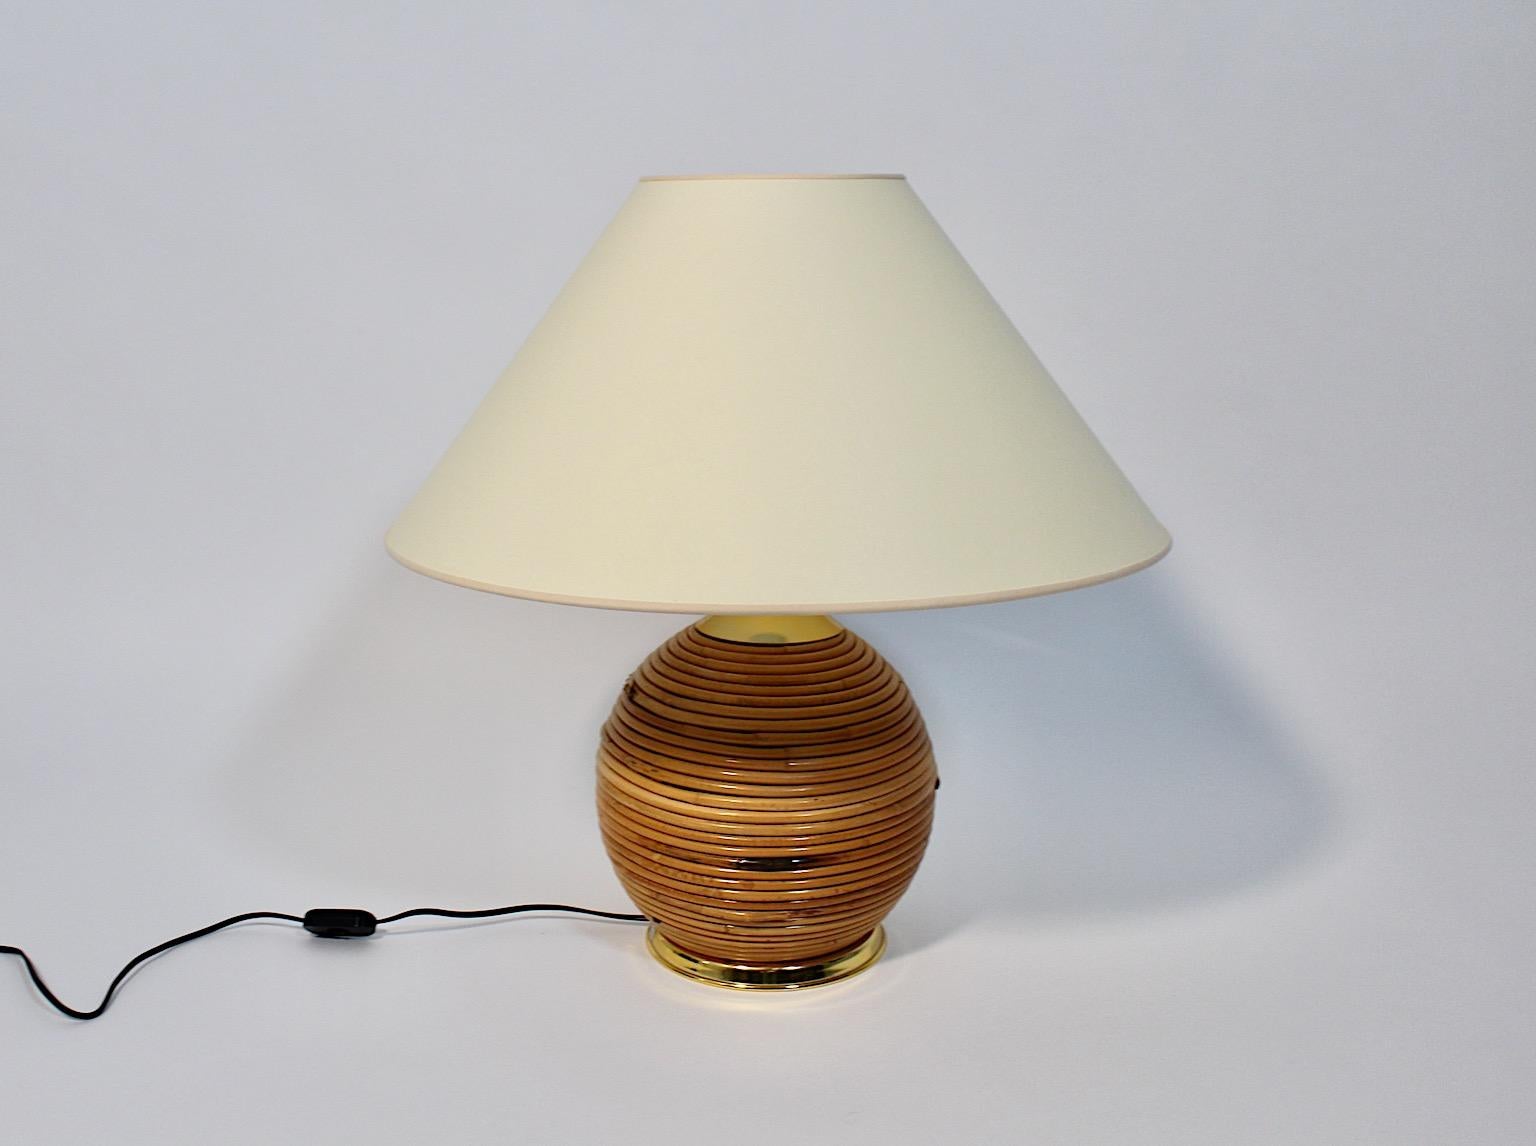 Organic Modern Vintage Table Lamp Rattan Golden Metal 1970s Italy In Good Condition For Sale In Vienna, AT